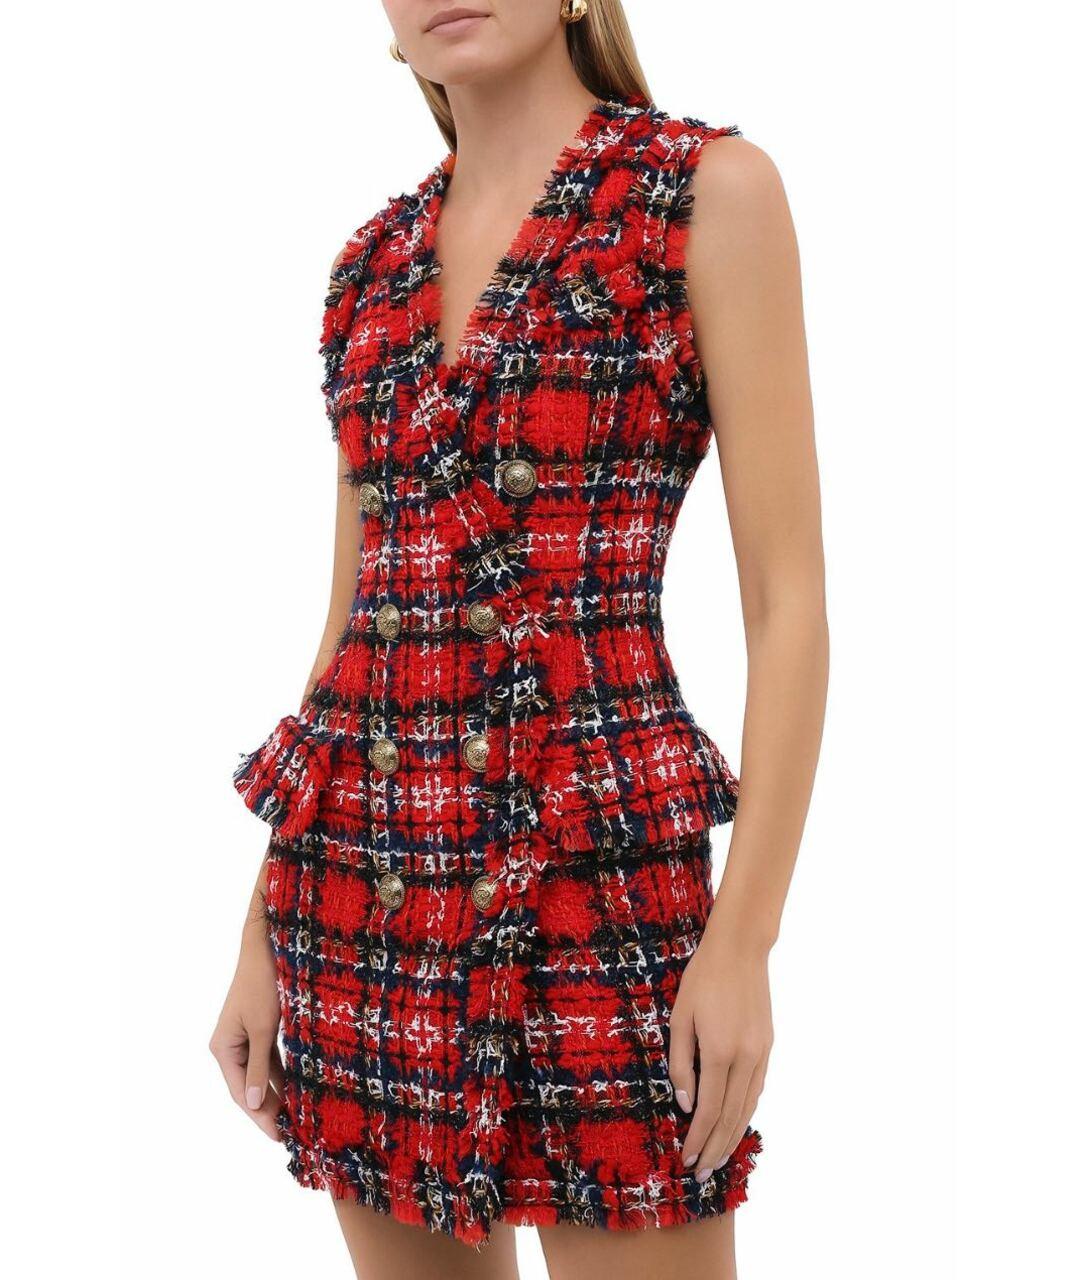 BALMAIN


Red tweed dress

Back zip closure 

Sleeveless 



Size 36 or US 4



Made in Madagascar

Pre-owned in excellent condition

 100% authentic guarantee 

       PLEASE VISIT OUR STORE FOR MORE GREAT ITEMS 
(OS)
